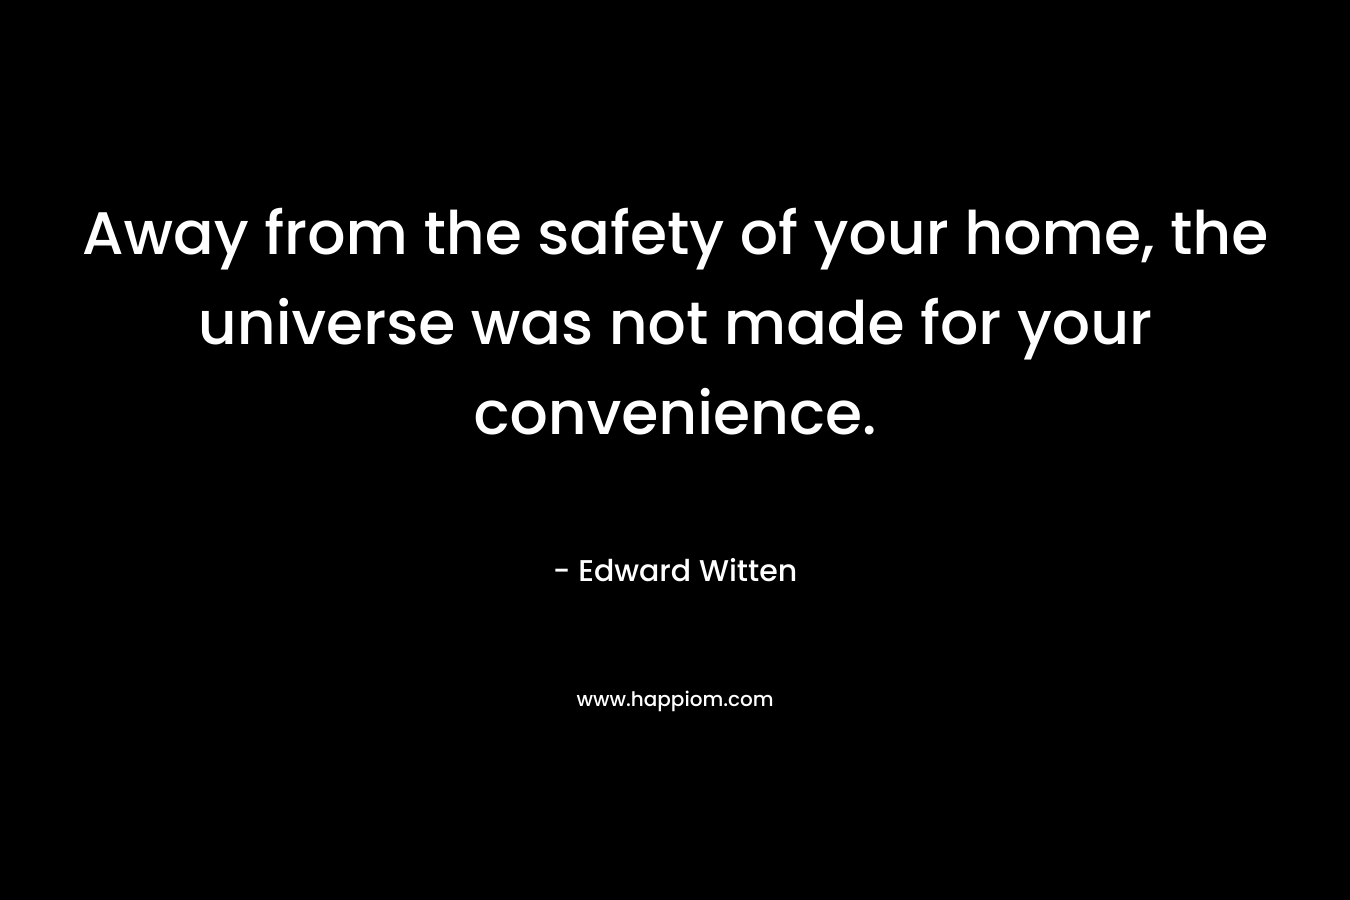 Away from the safety of your home, the universe was not made for your convenience.